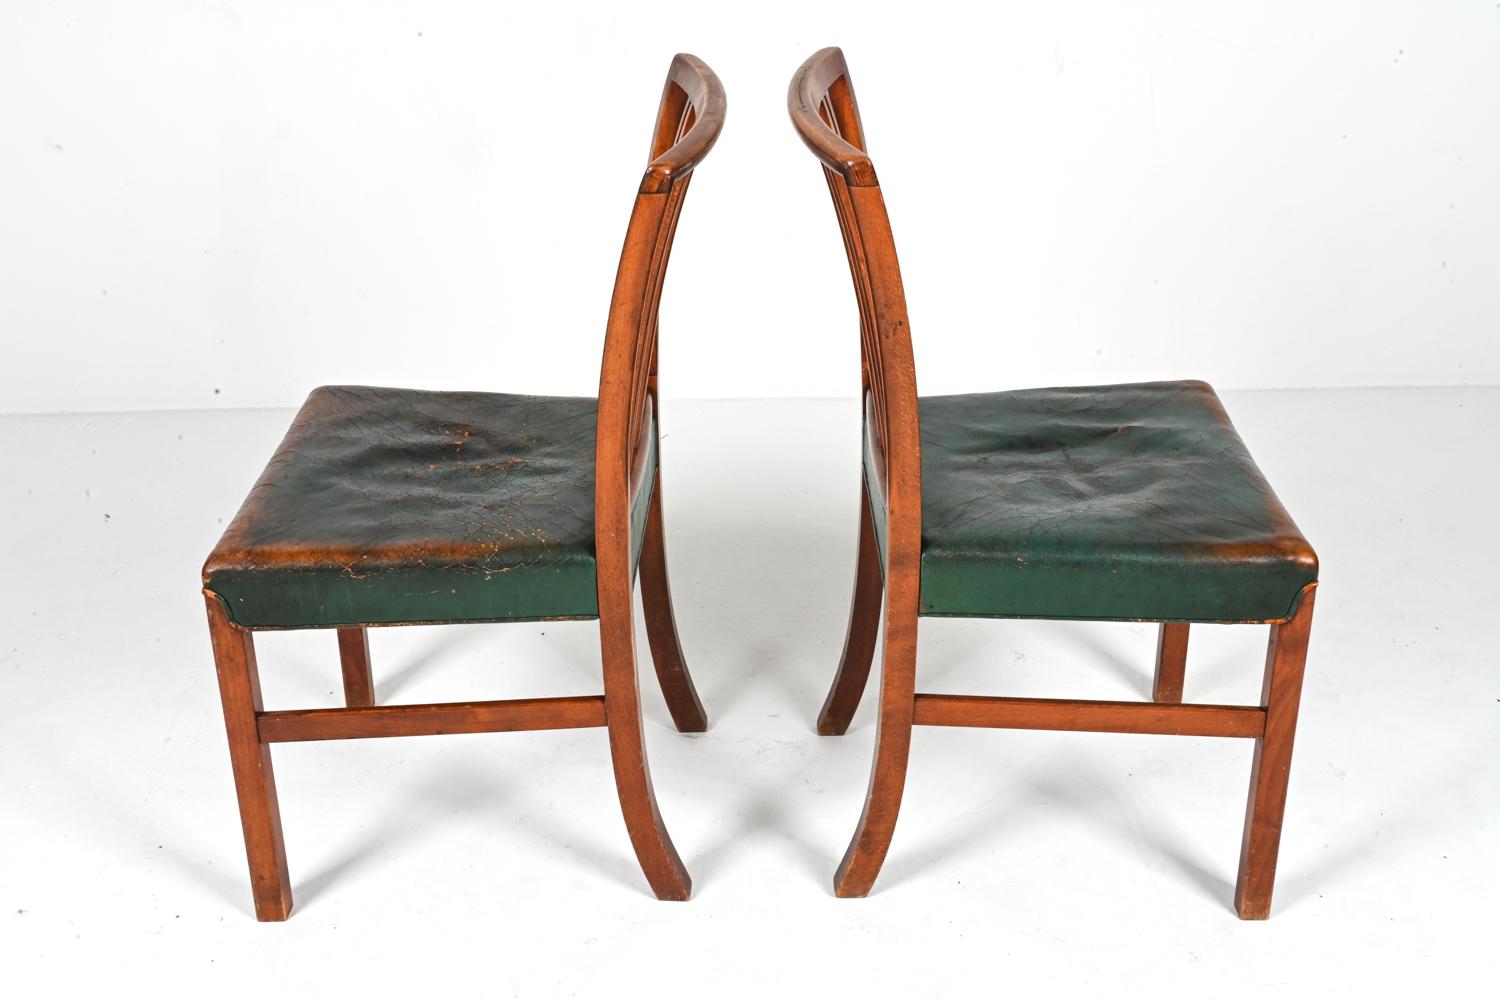 '12' Rare Model 1675B Dining Chairs by Ole Wanscher Fritz Hansen, c. 1940's For Sale 7